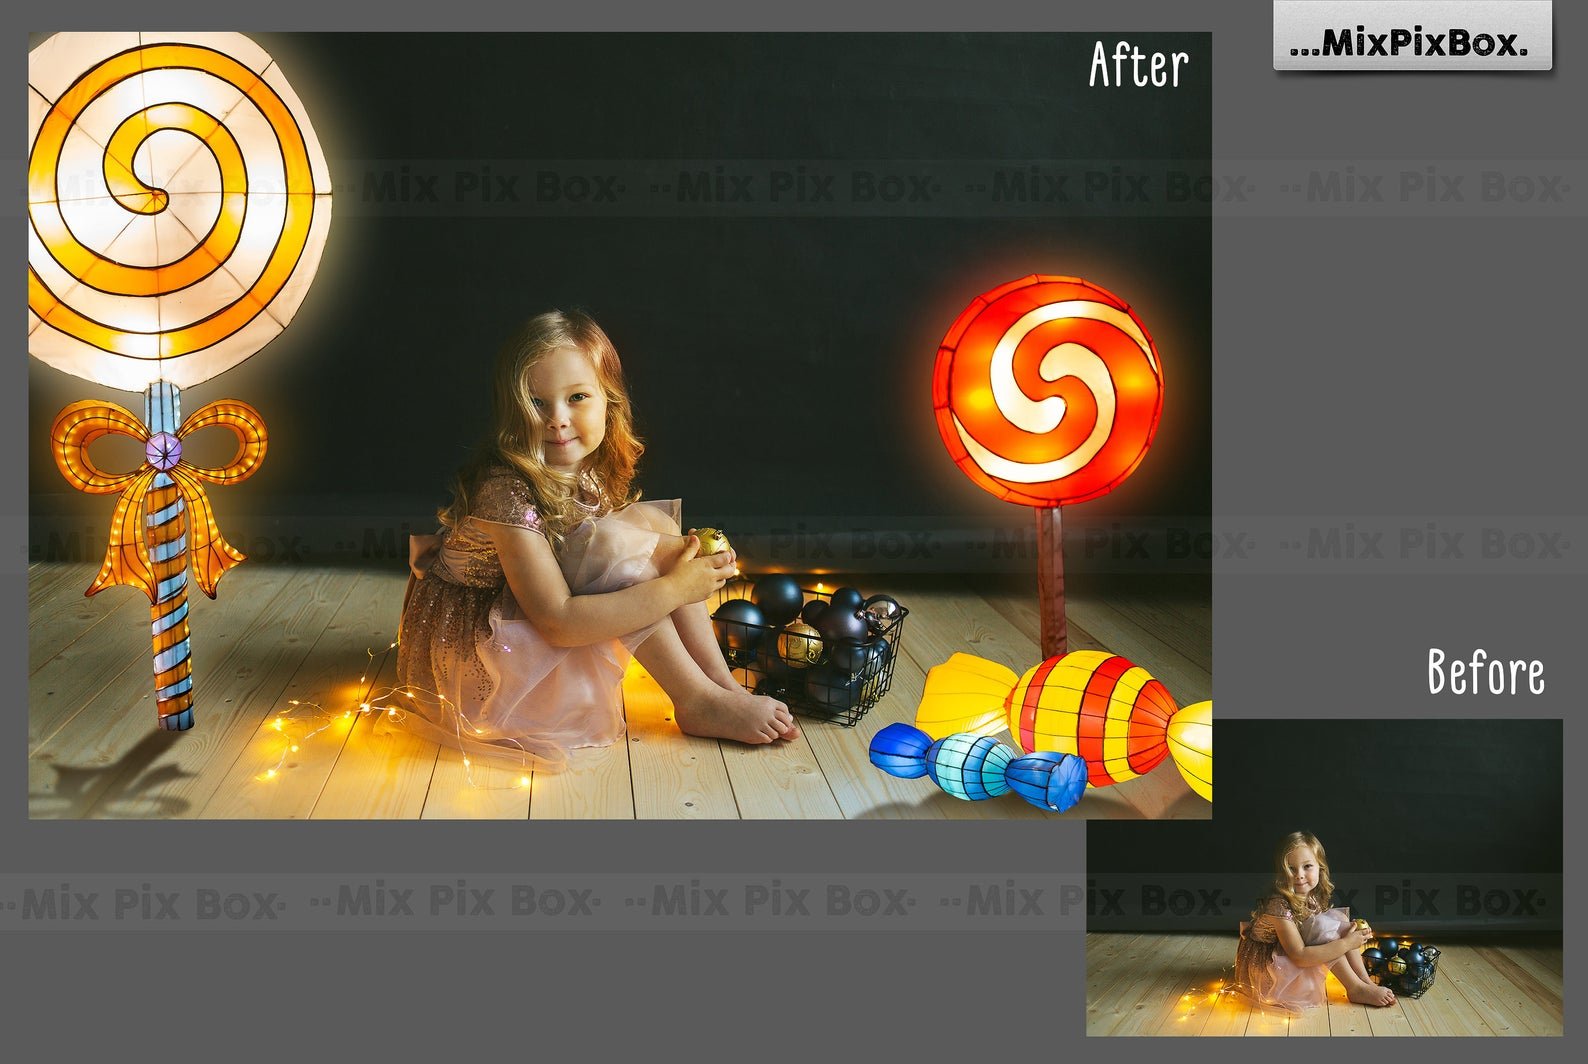 Themed Lantern Overlays and Backdroppreview image.